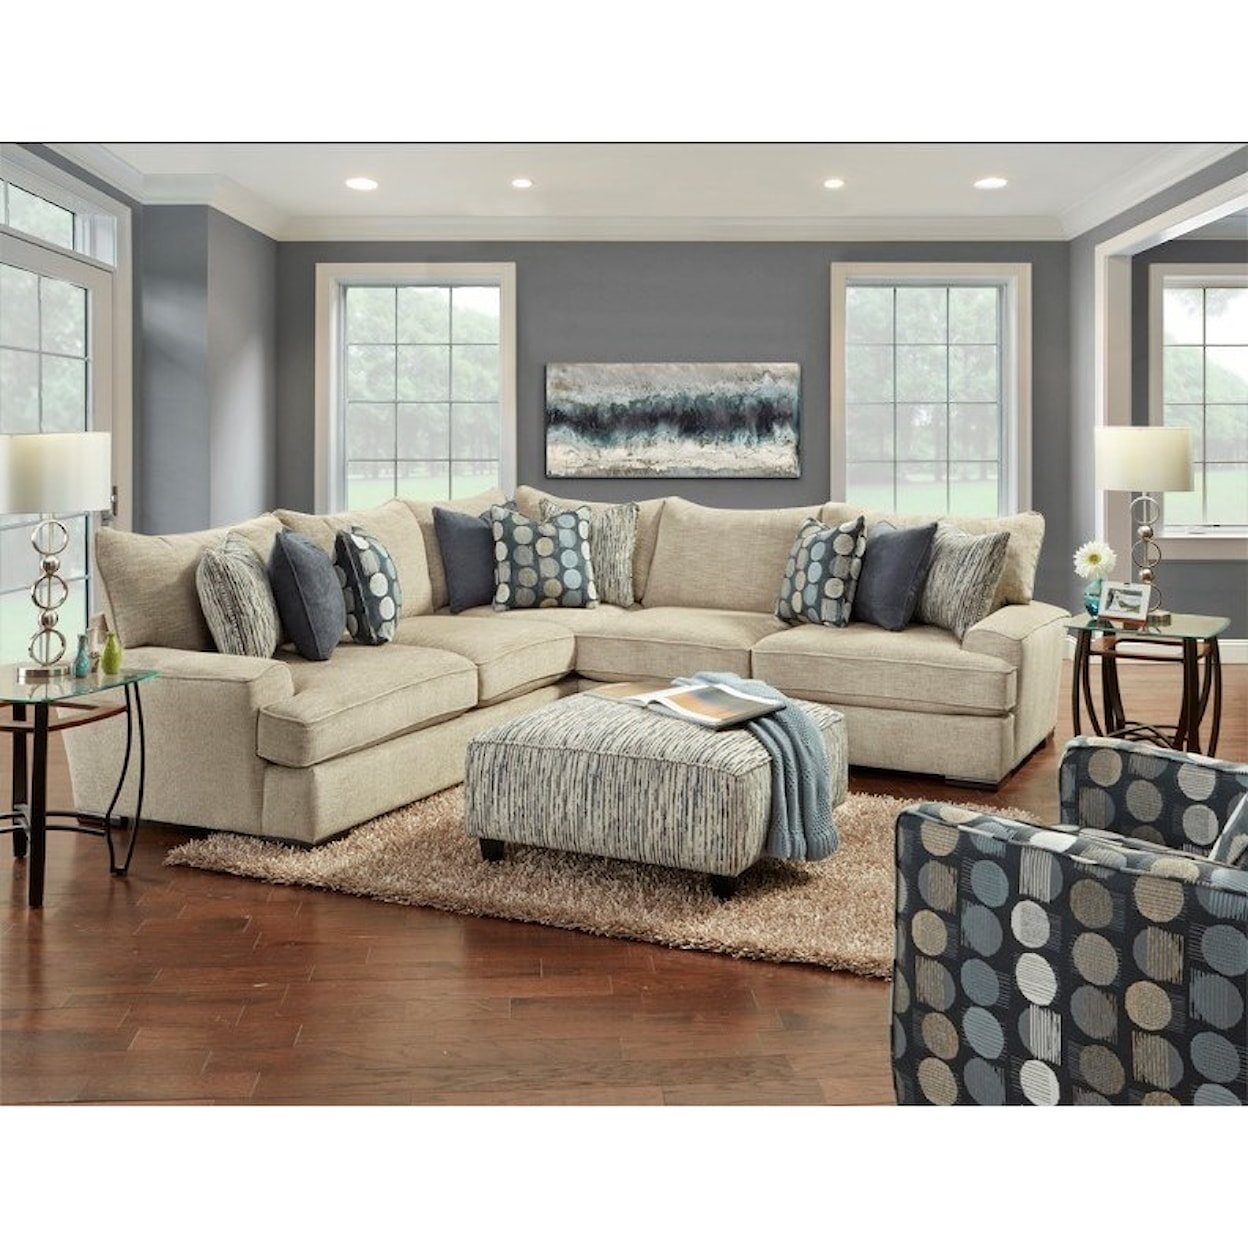 Fusion Furniture 2000 Stationary Living Room Group